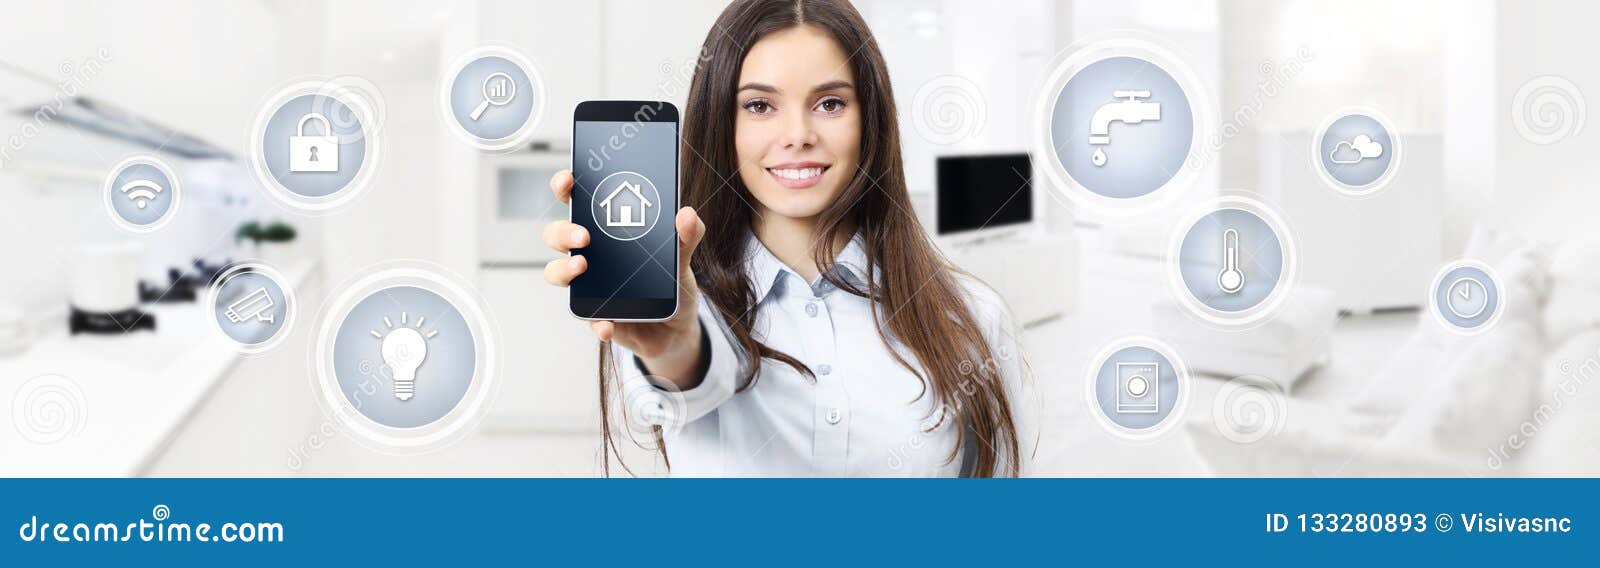 smart home control concept smiling woman showing cell phone screen with s on kitchen and living room blurred background